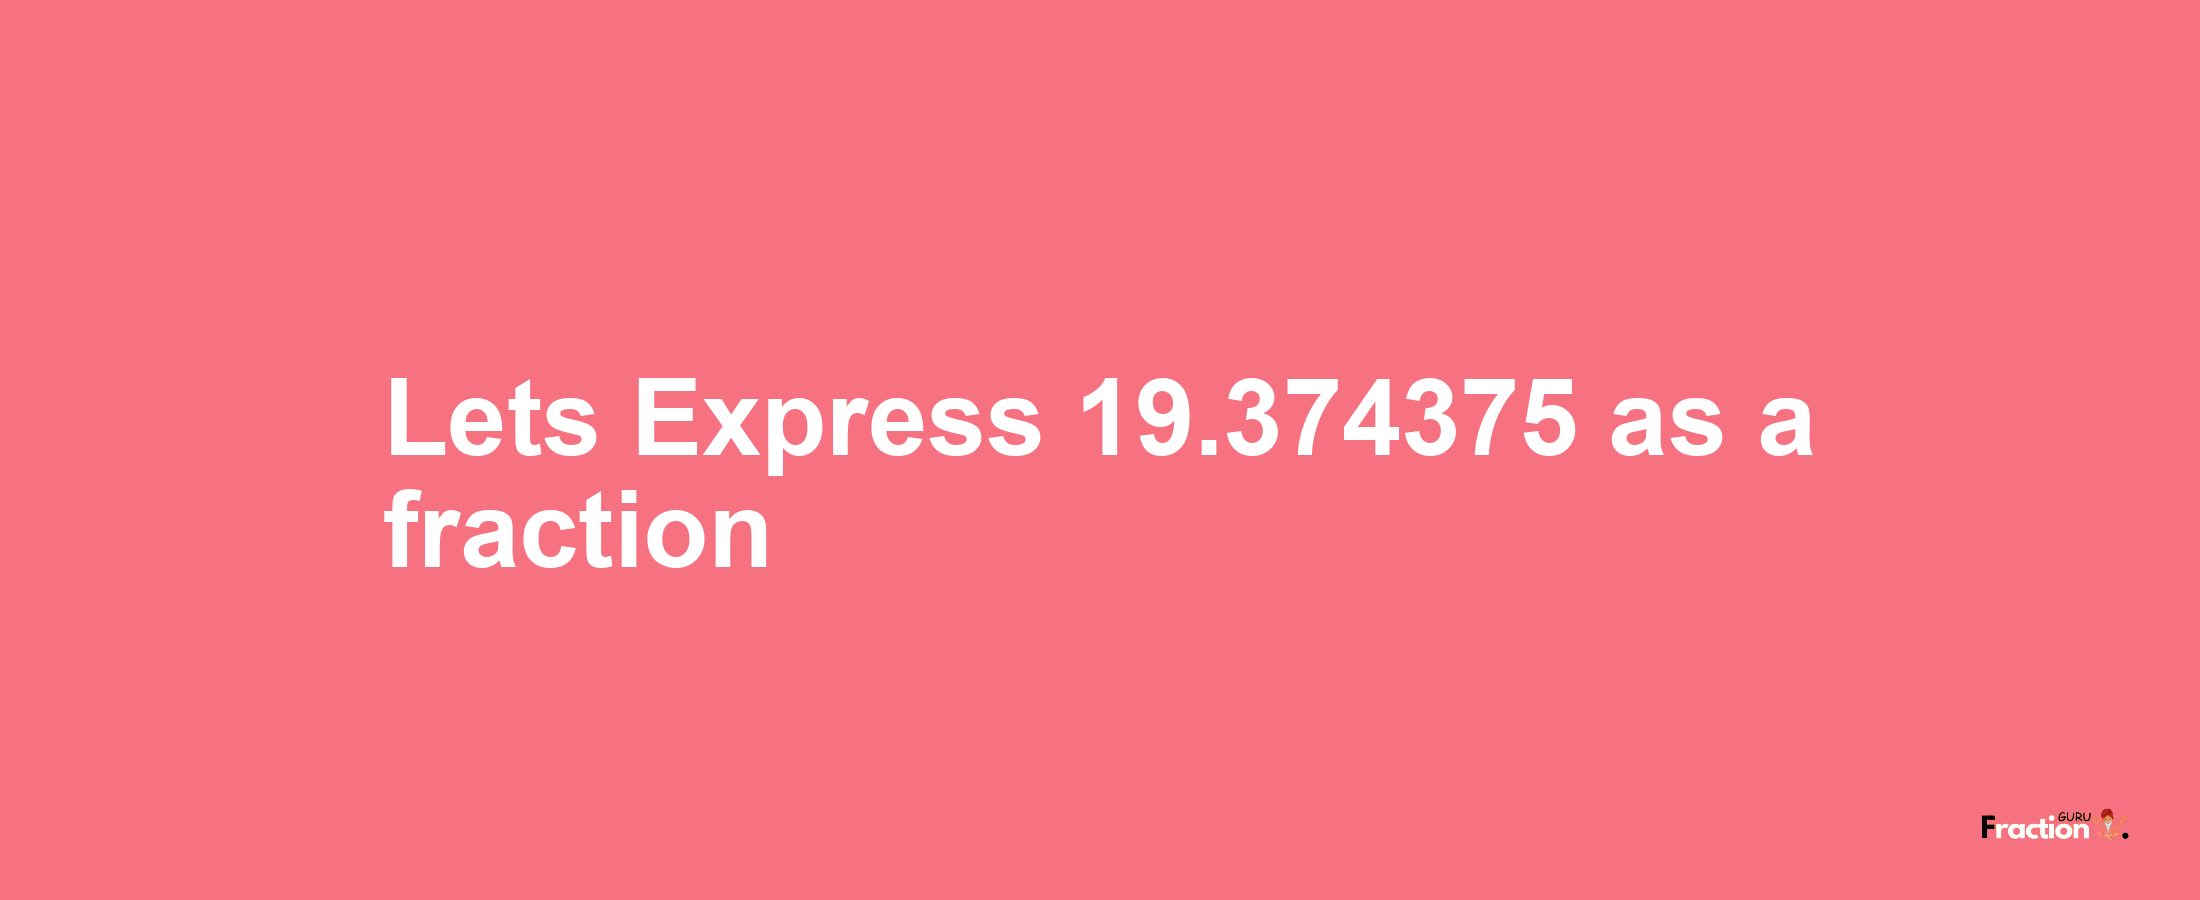 Lets Express 19.374375 as afraction